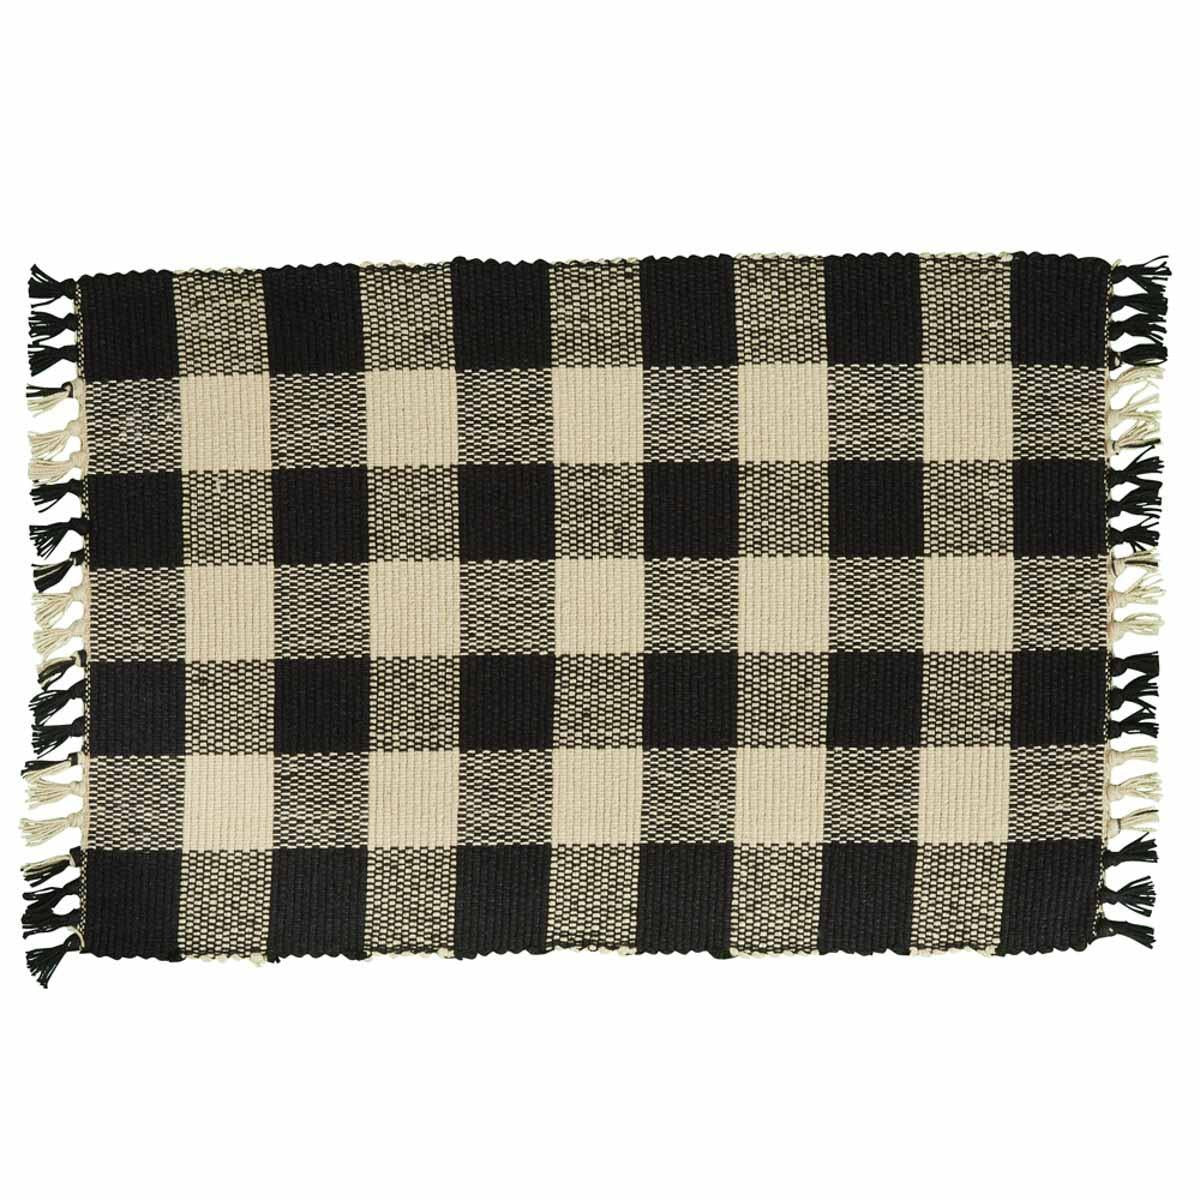 Park Design Wicklow Check Yarn Placemat (Black)